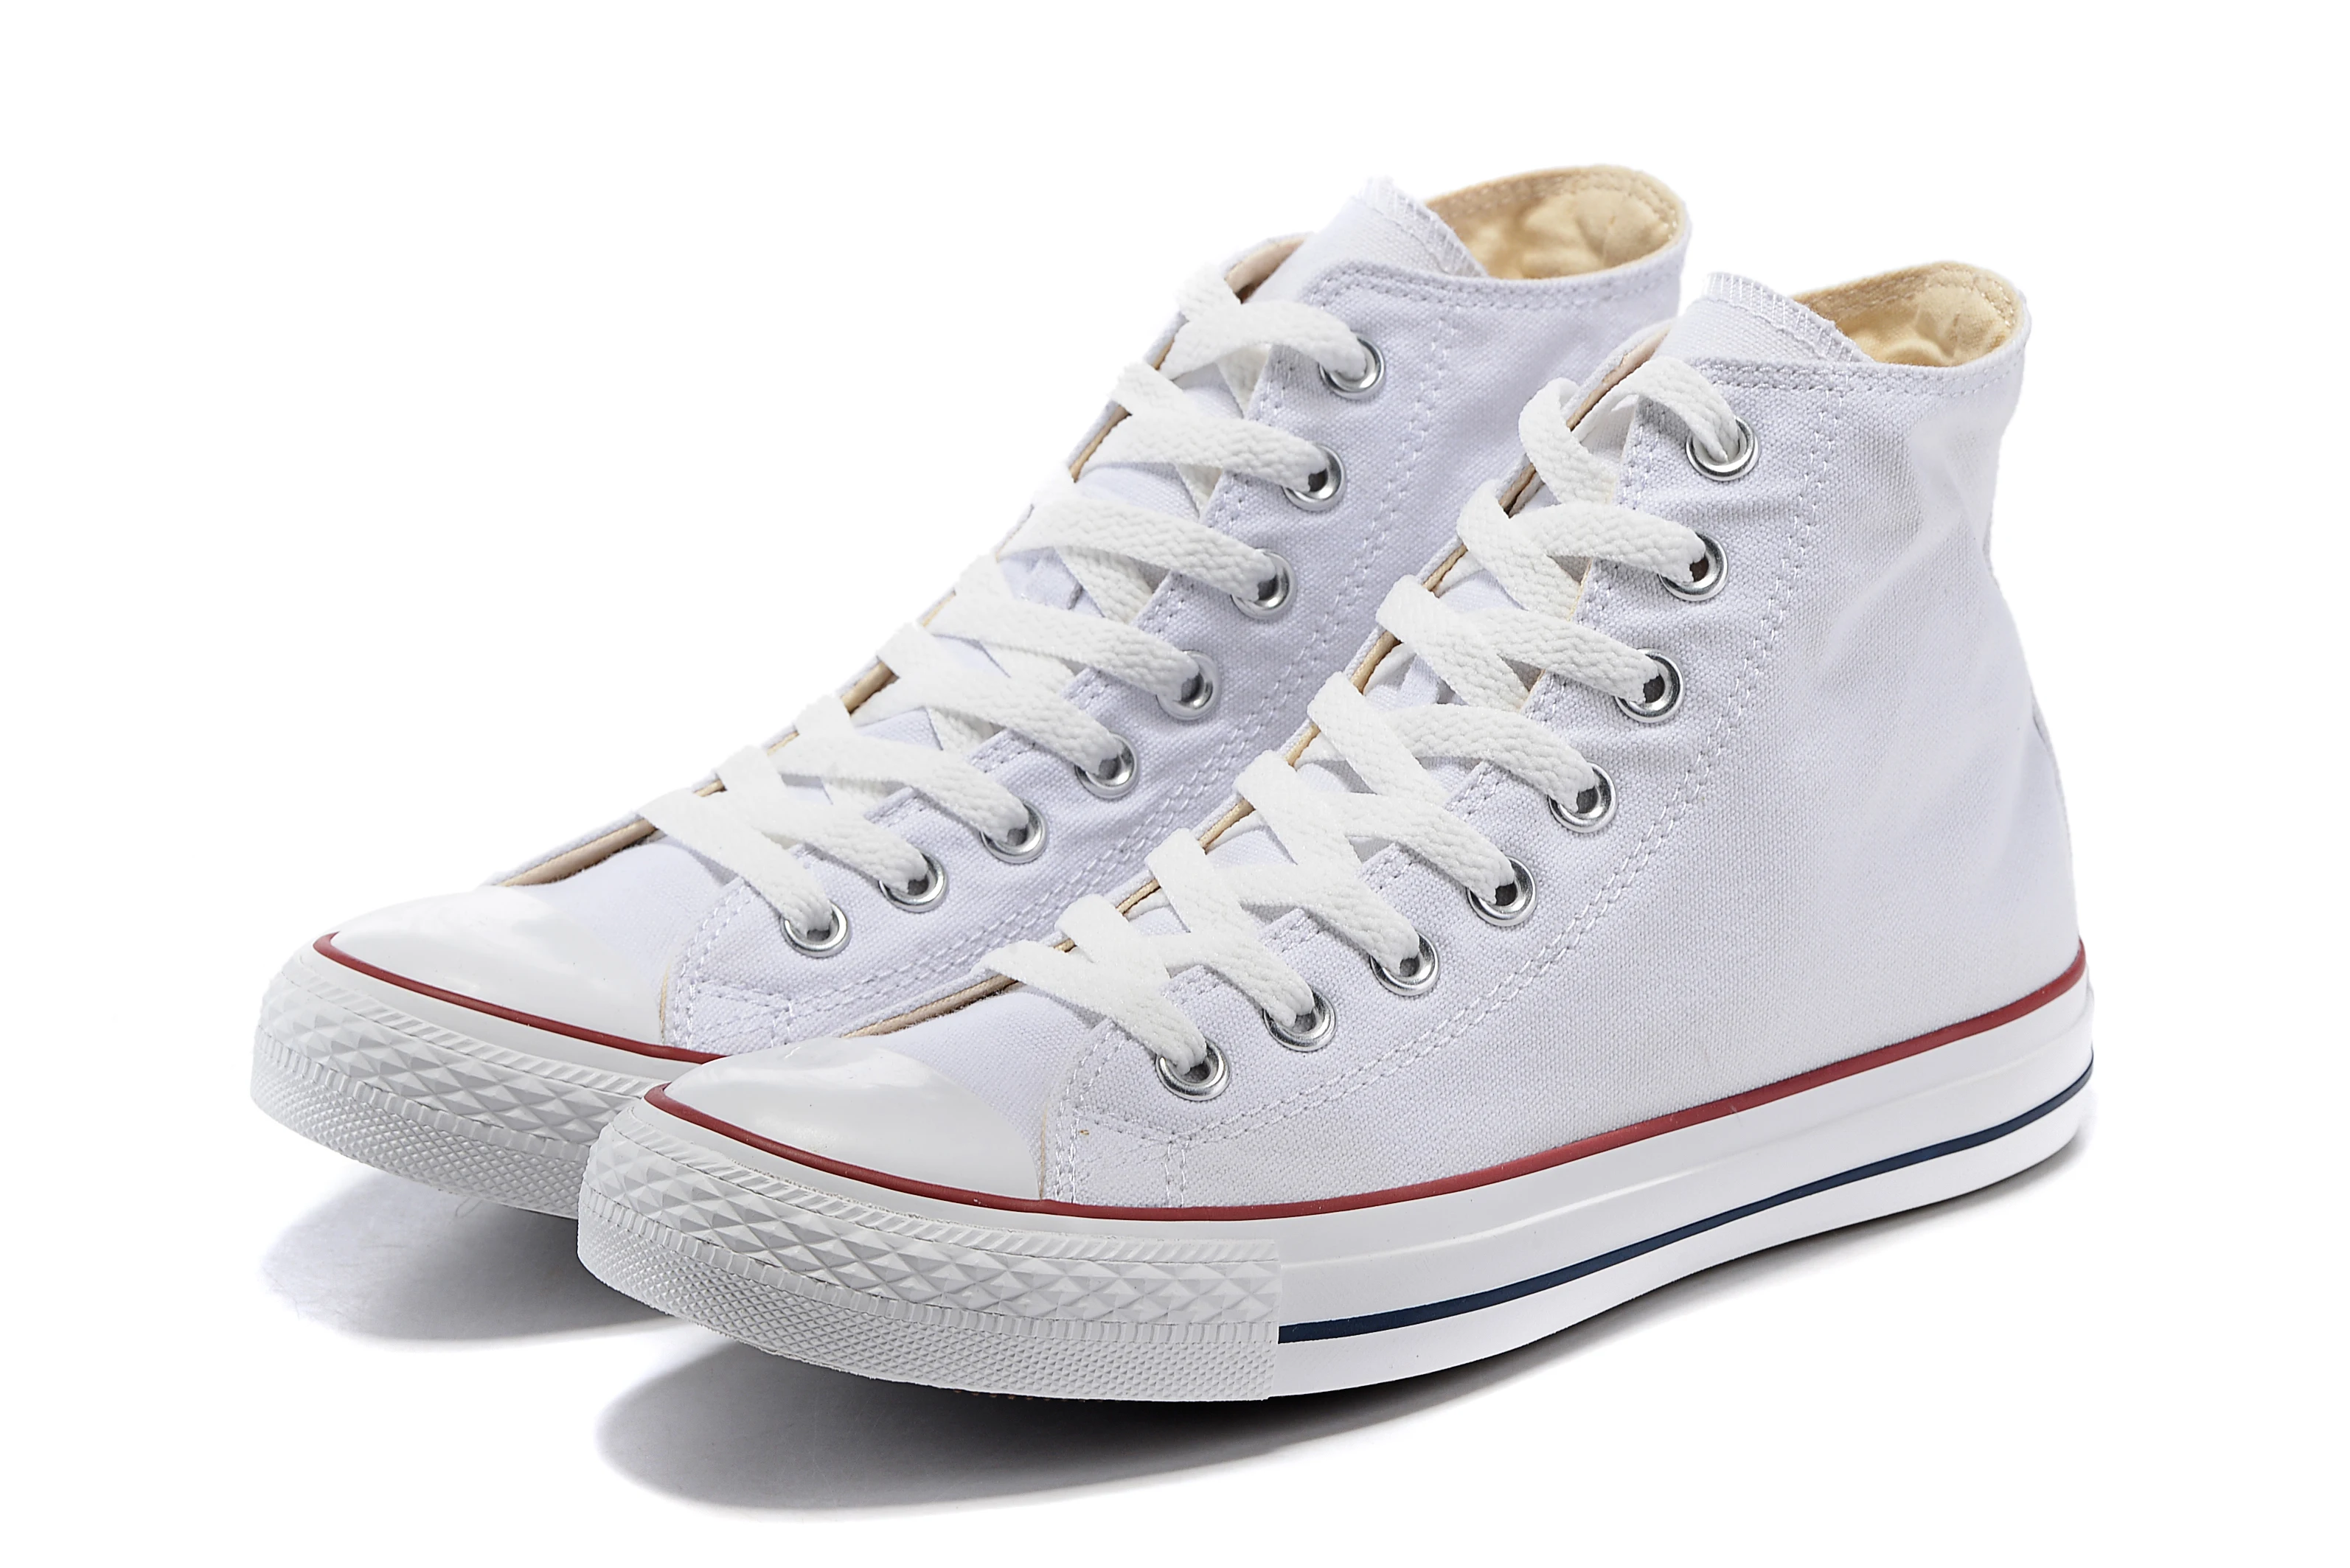 

Converse Unisex Chuck Taylor Classic Colour All Star Hi Tops Size Trainers Skateboard Shoes Canvas Women's Sneakers